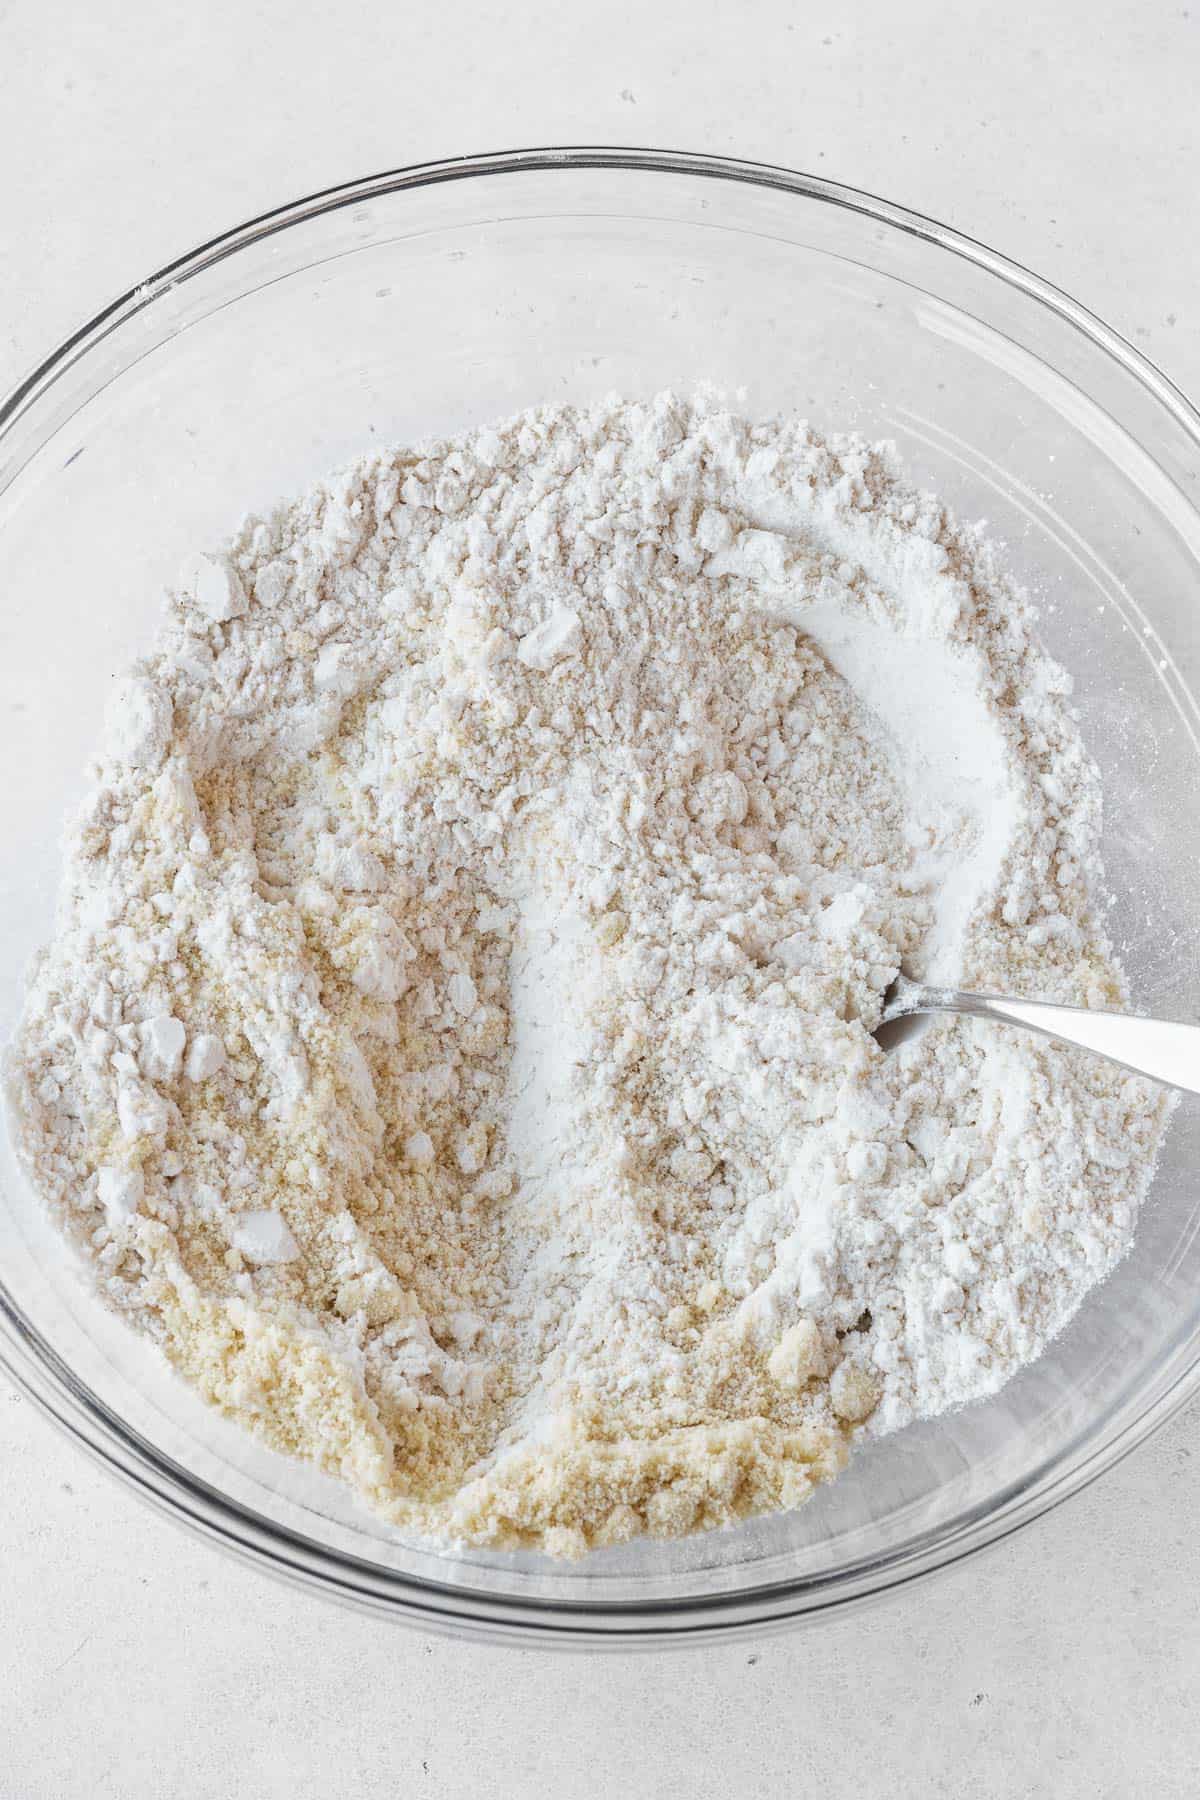 Dry ingredients for dairy-free pie crust mixed together in a glass bowl.